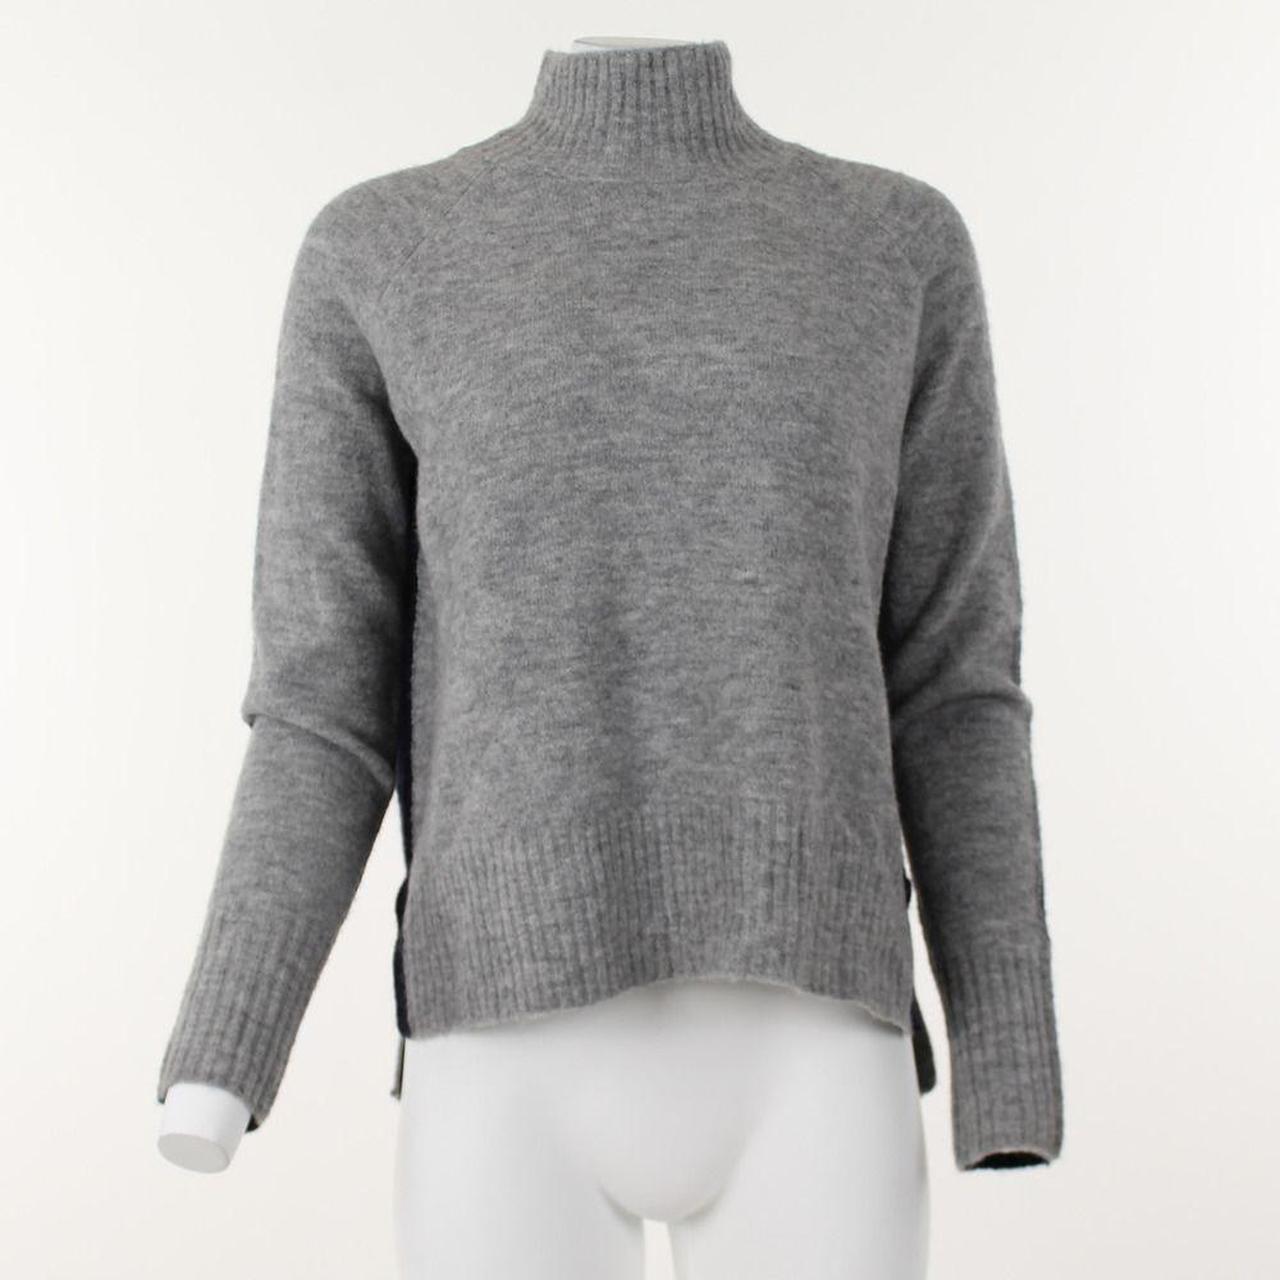 Whistles Women's Grey and Blue Jumper